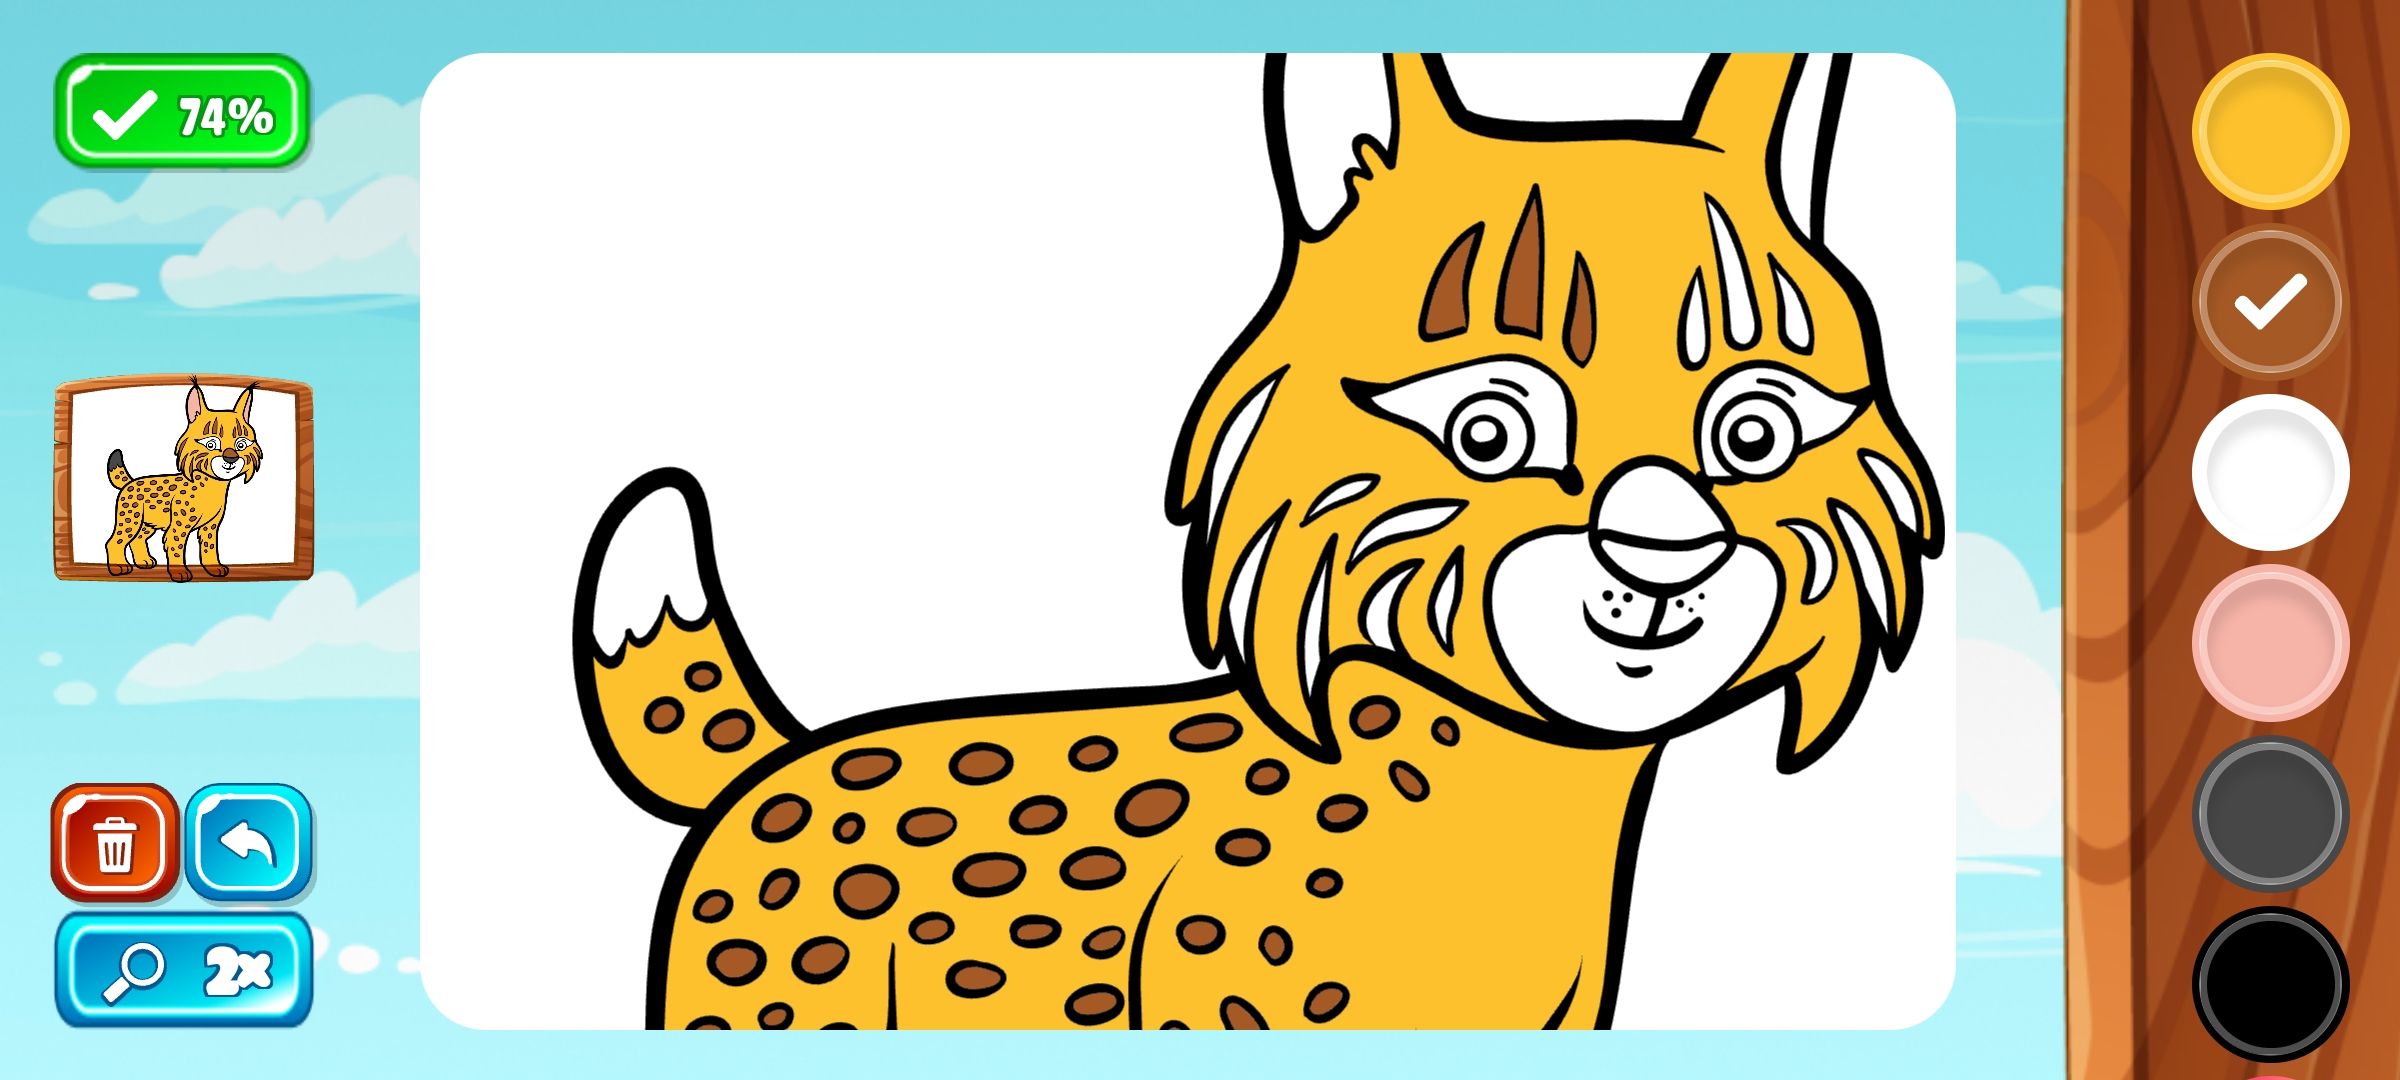 in the middle of coloring a leopard in riafy technologies app